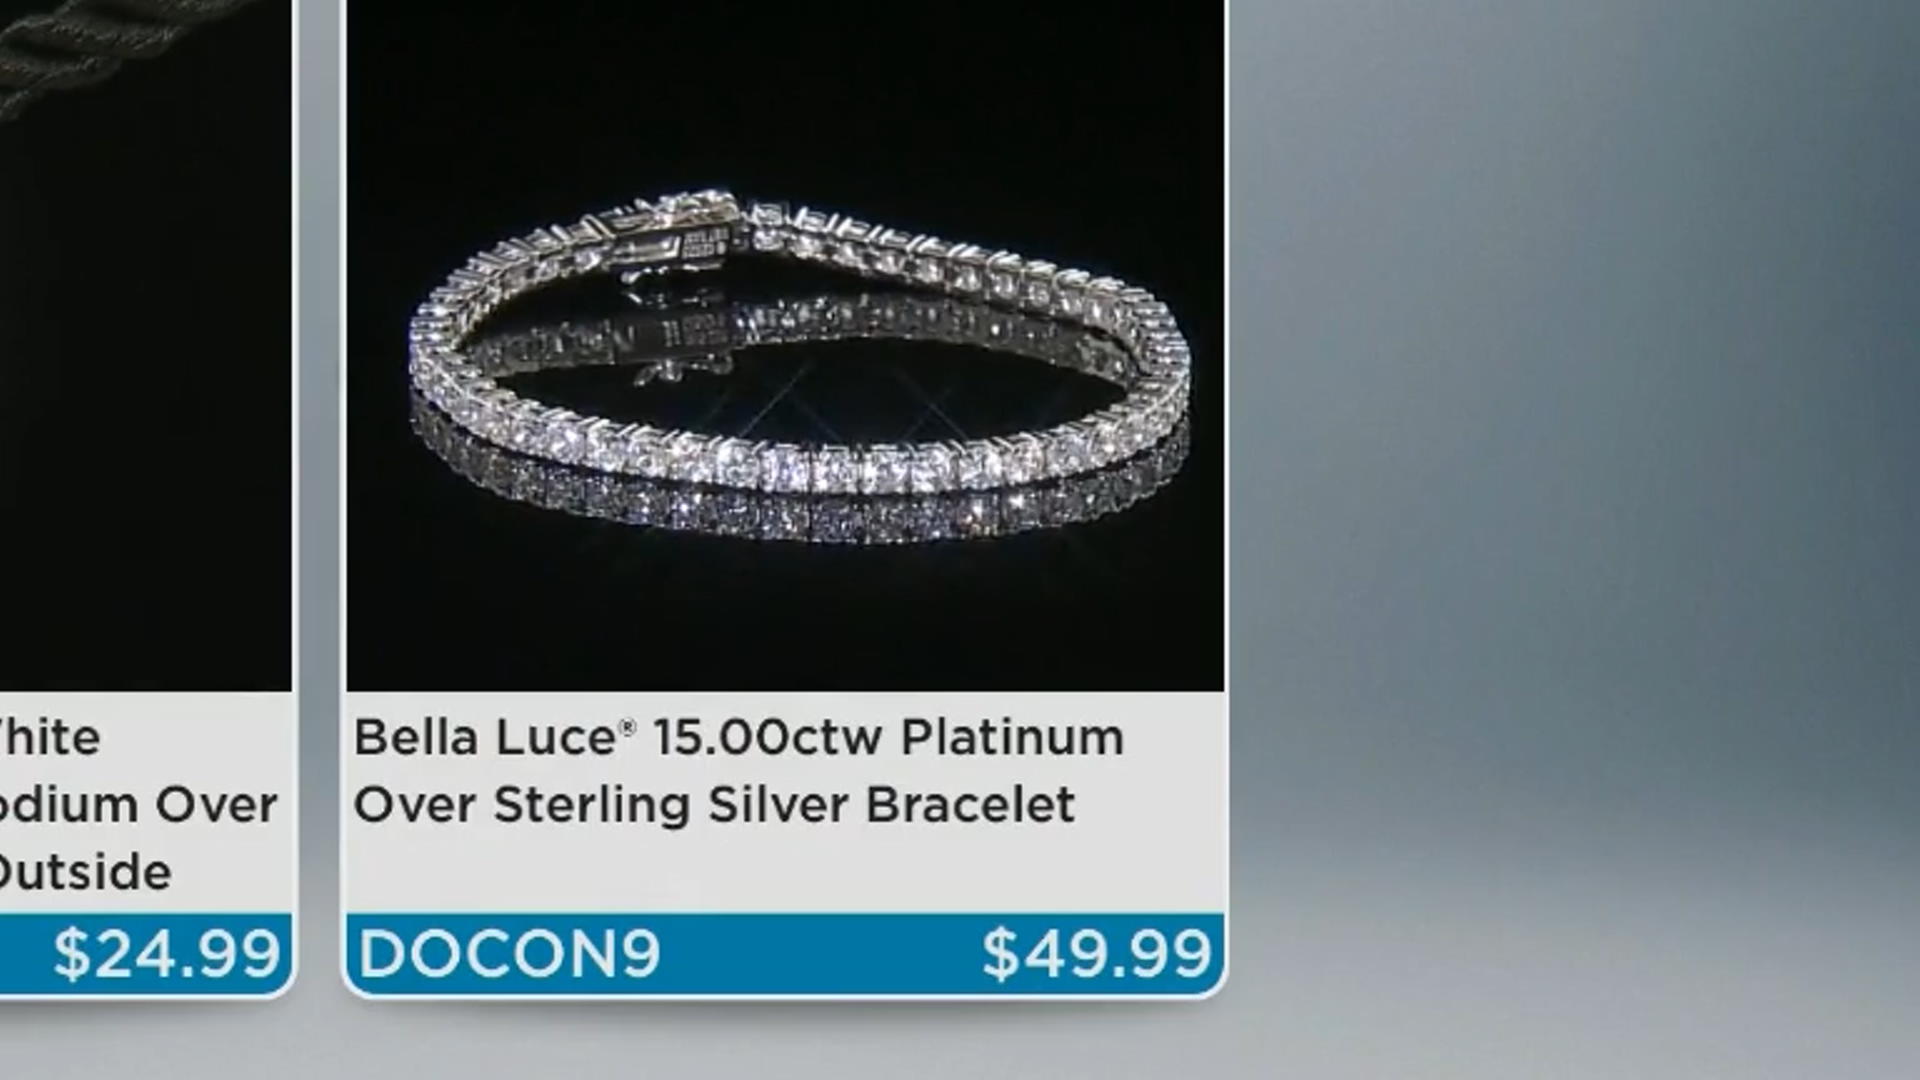 White Cubic Zirconia Rhodium Over Sterling Silver Inside Out Hoop Earrings 3.00ctw Video Thumbnail